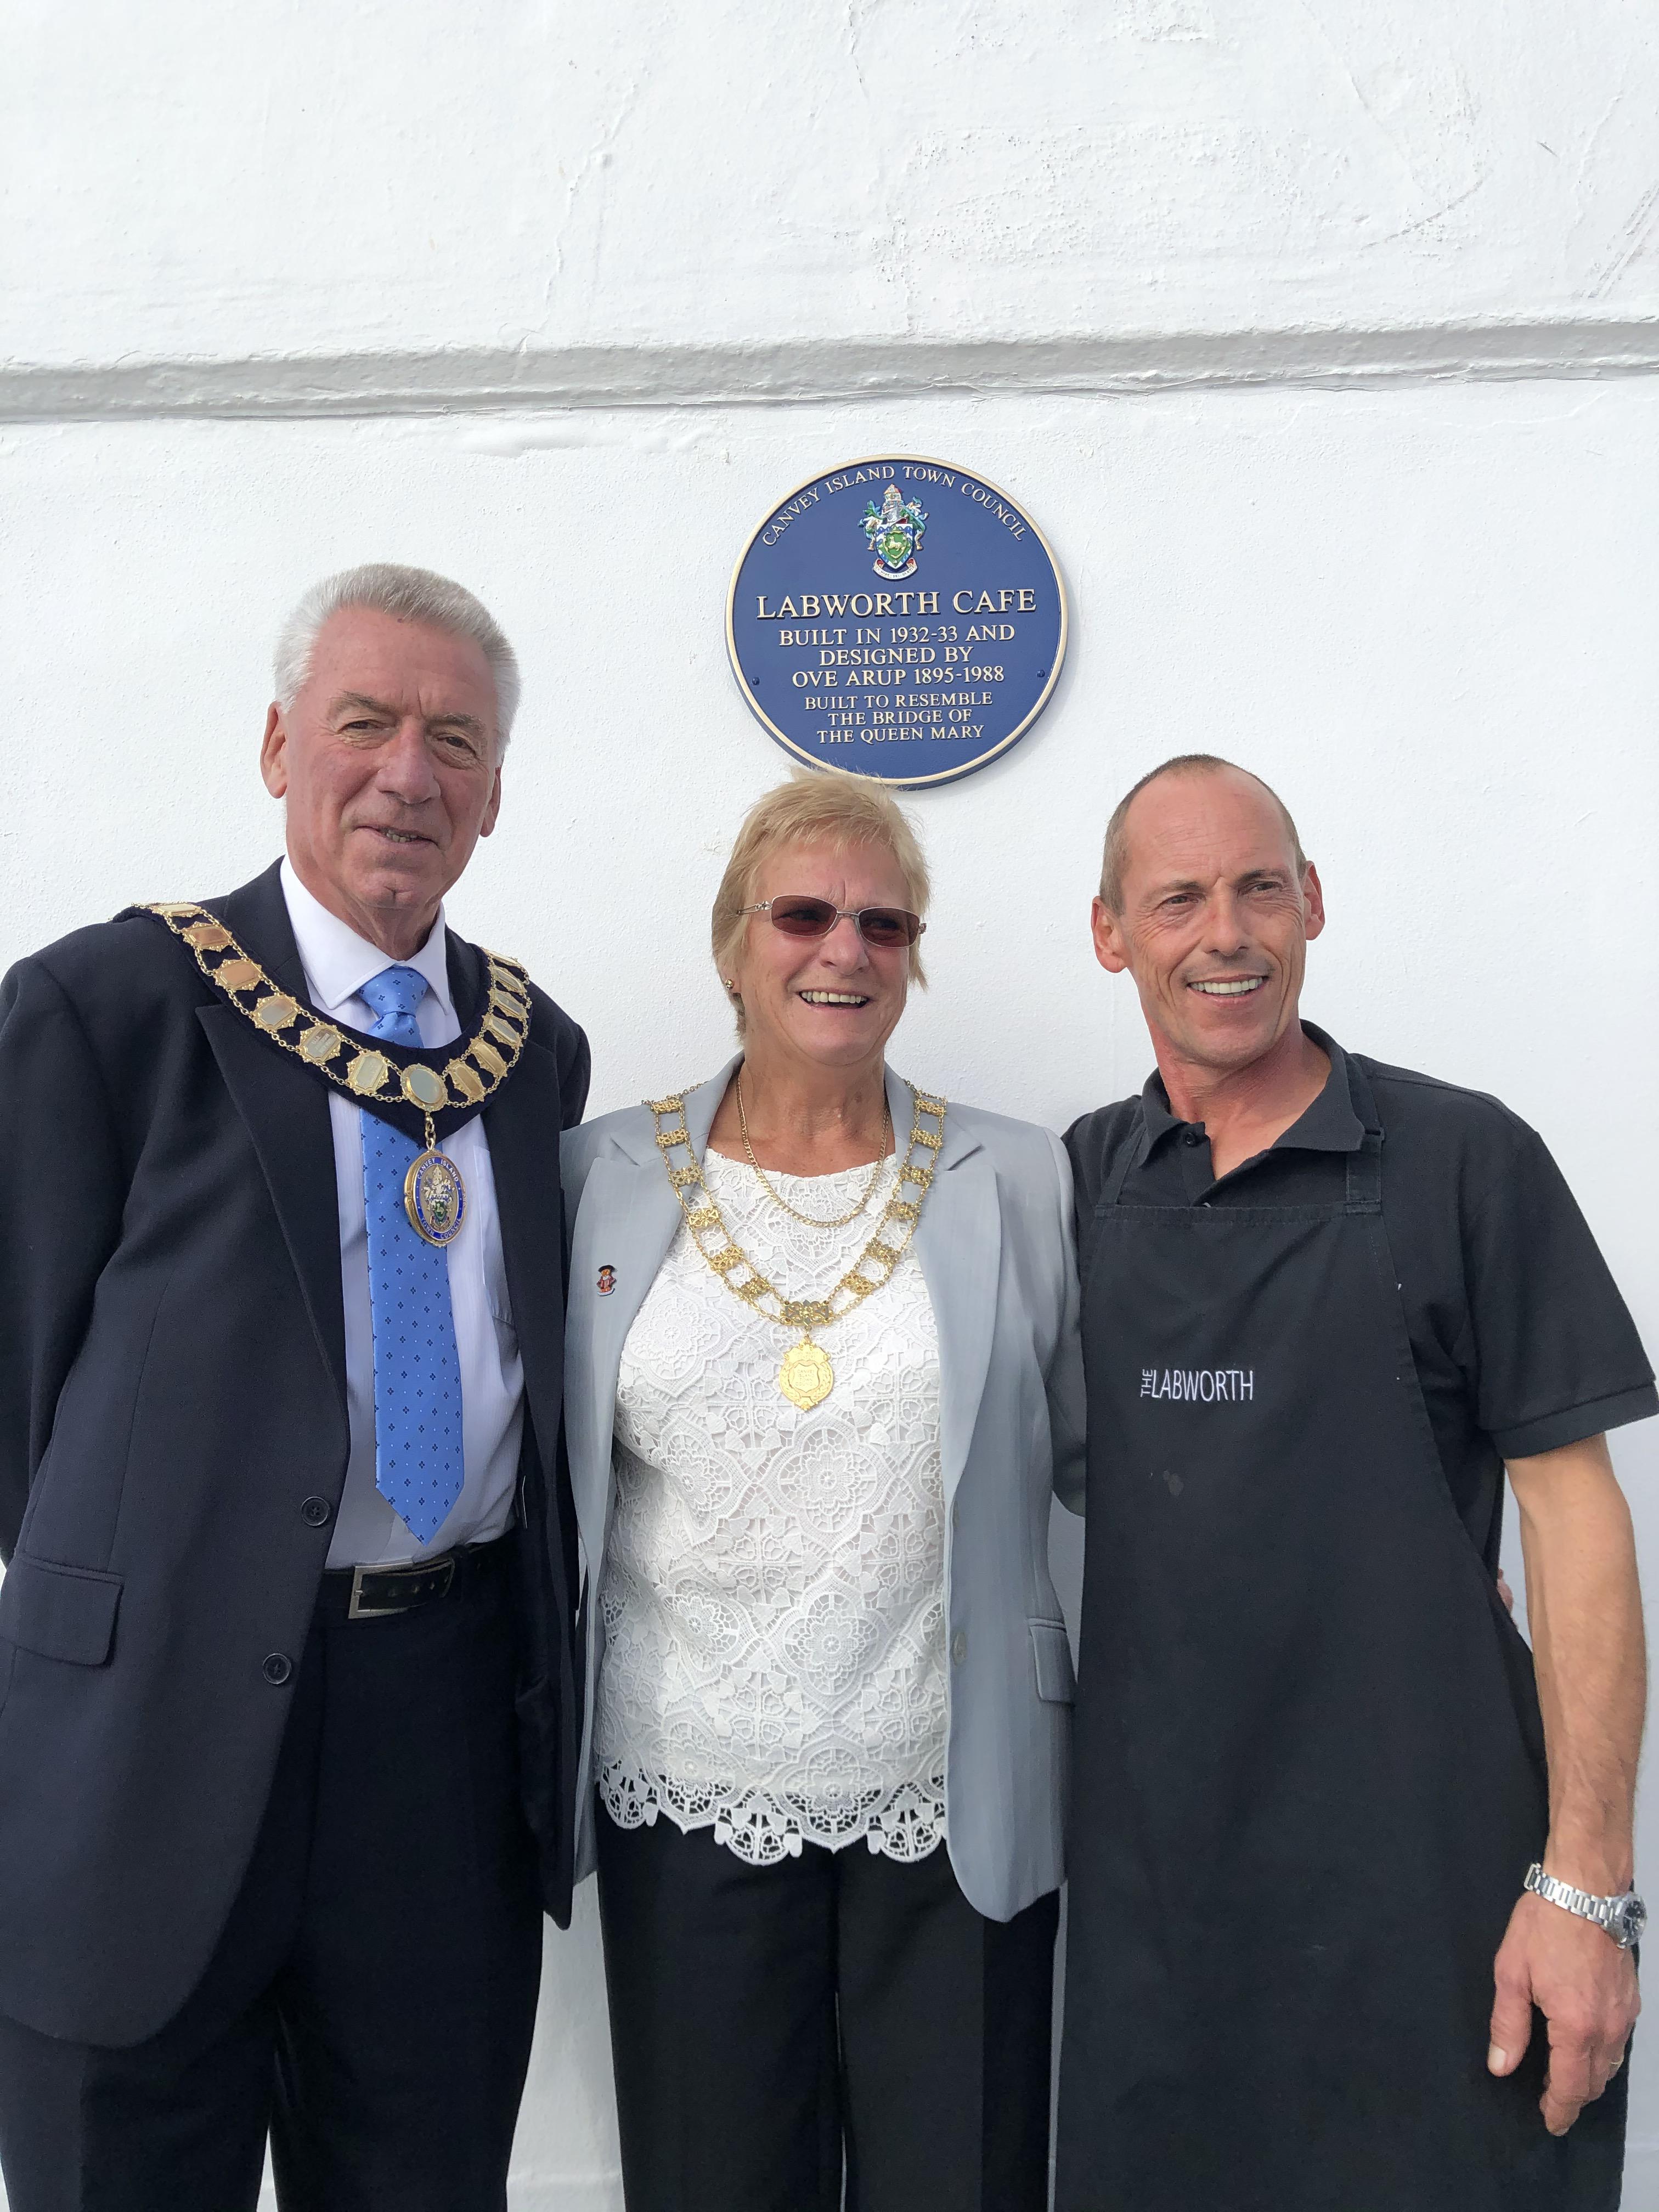 Blue Plaque at Labworth Cafe with Town Mayor, Consort and Cafe Owner